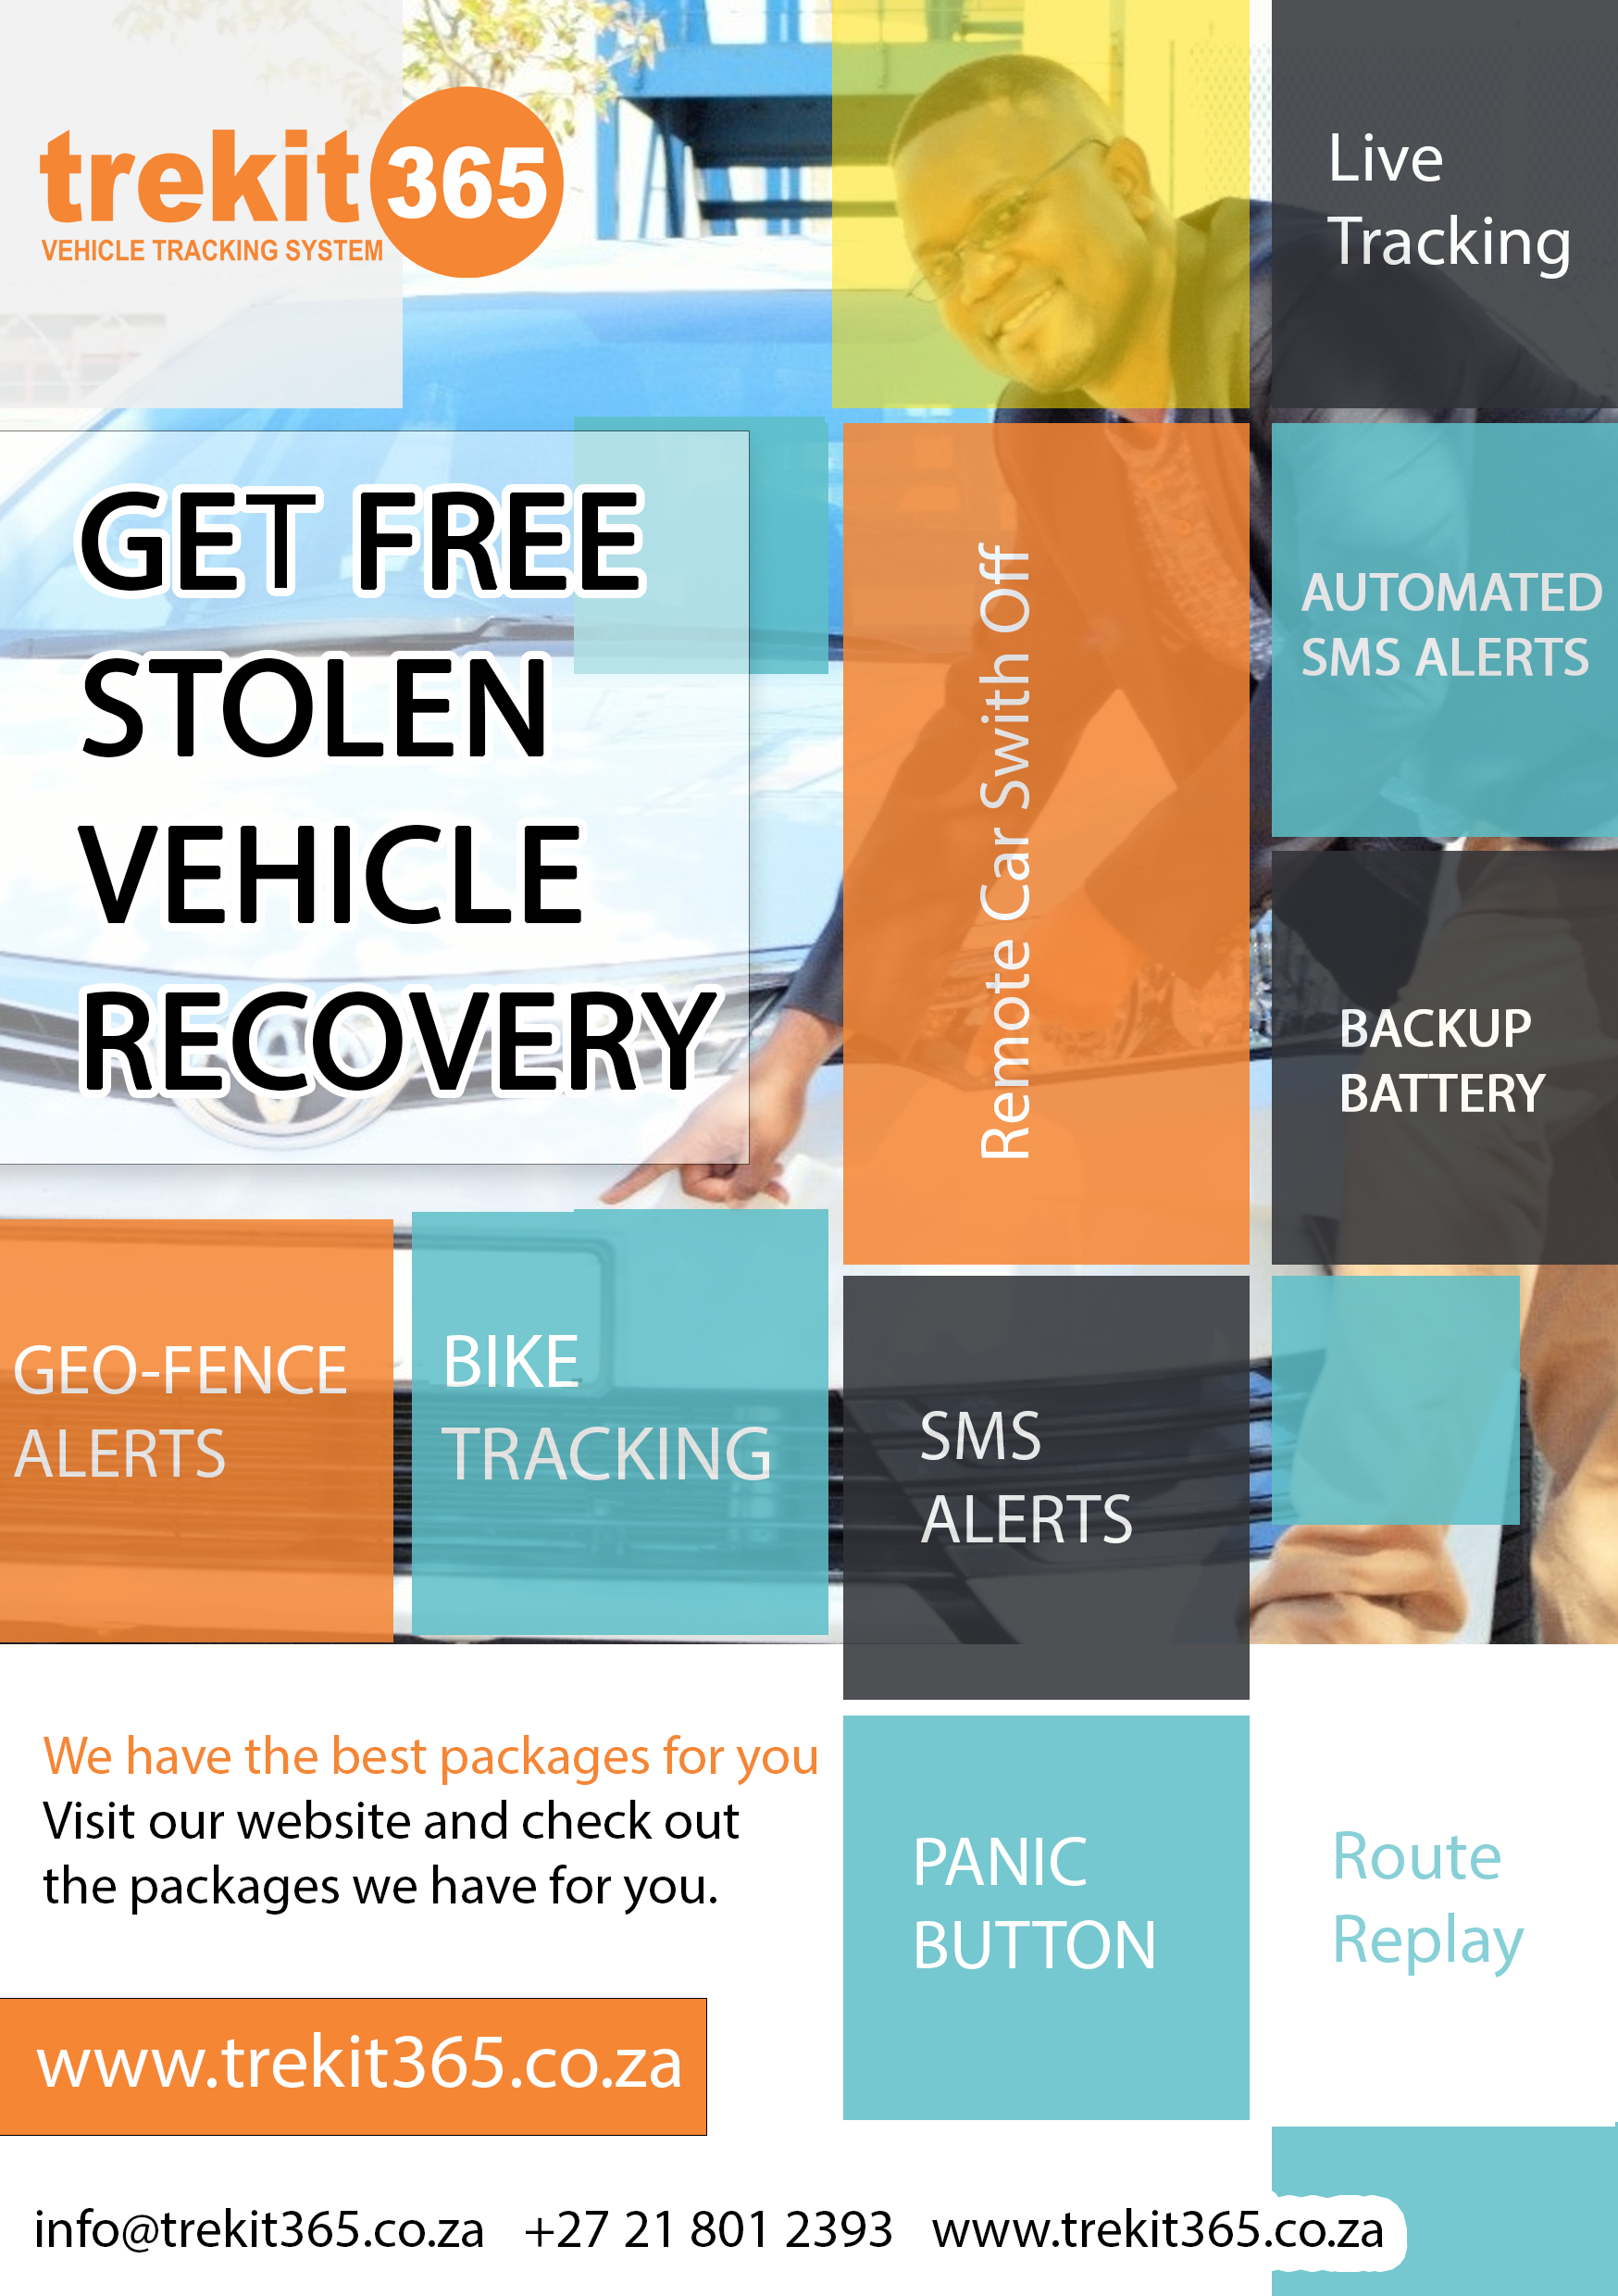 Stolen vehicle recovery